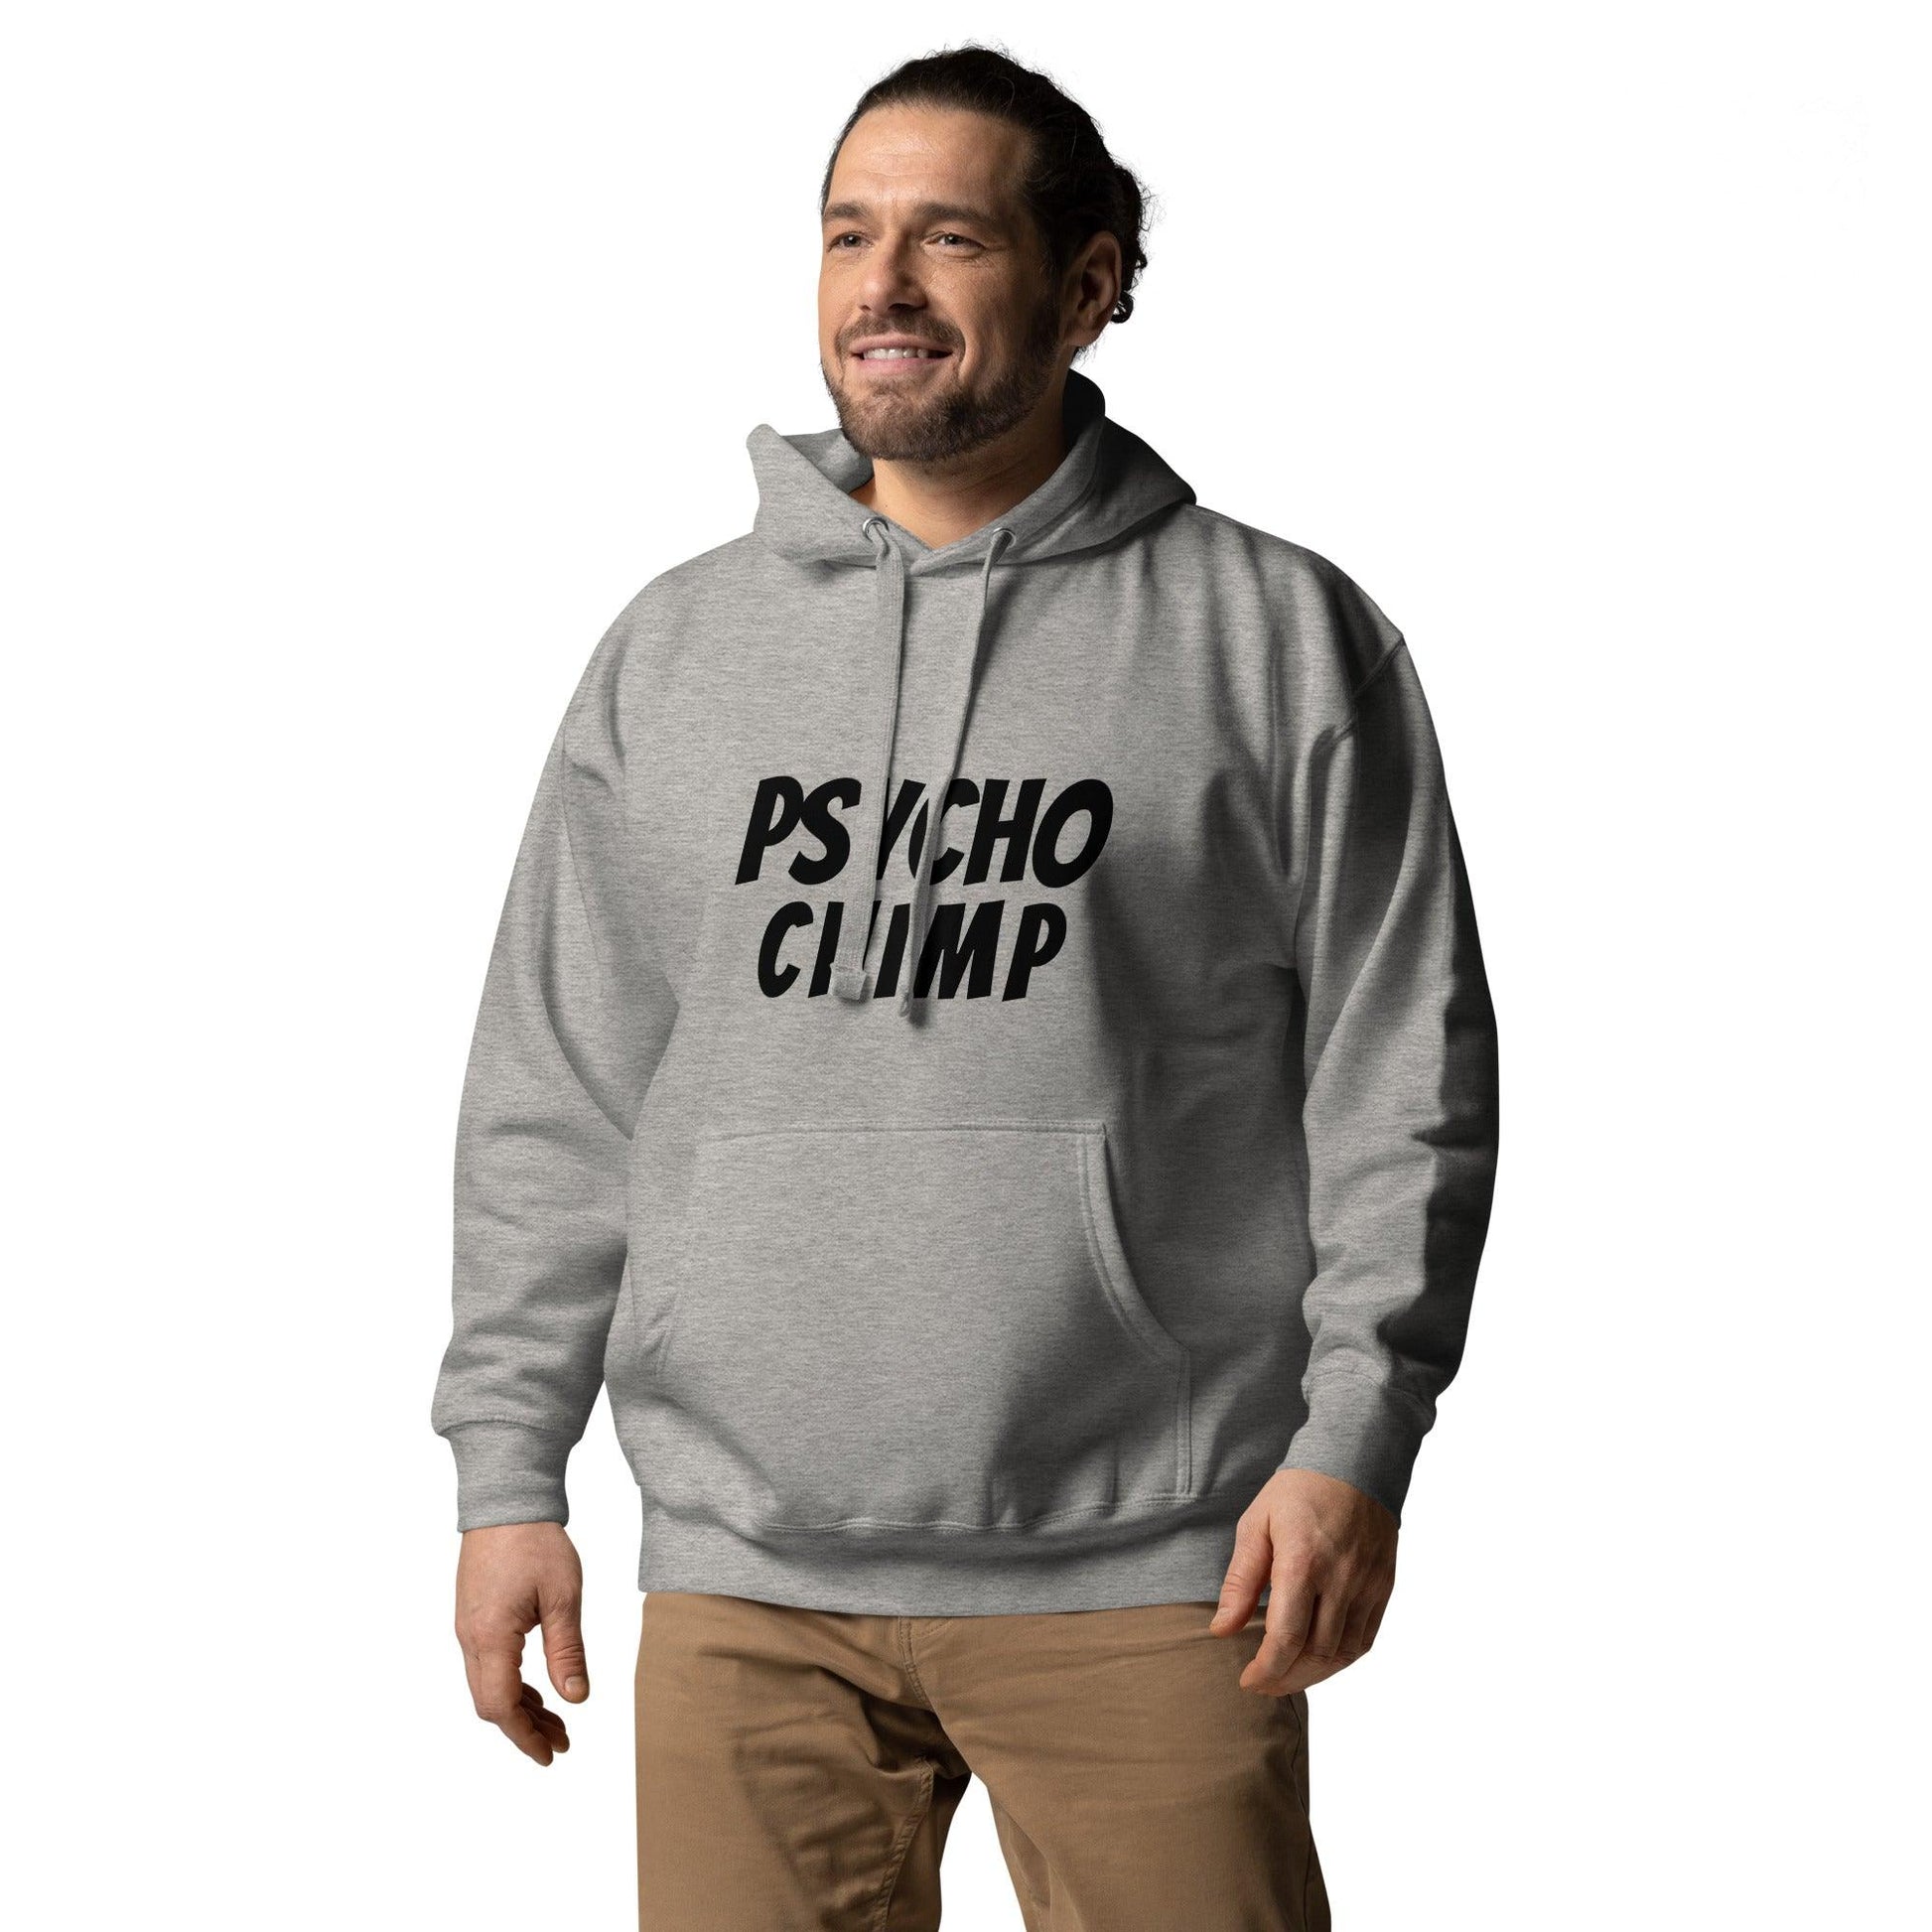 Chimped Out Hoodie - Psycho Chimp